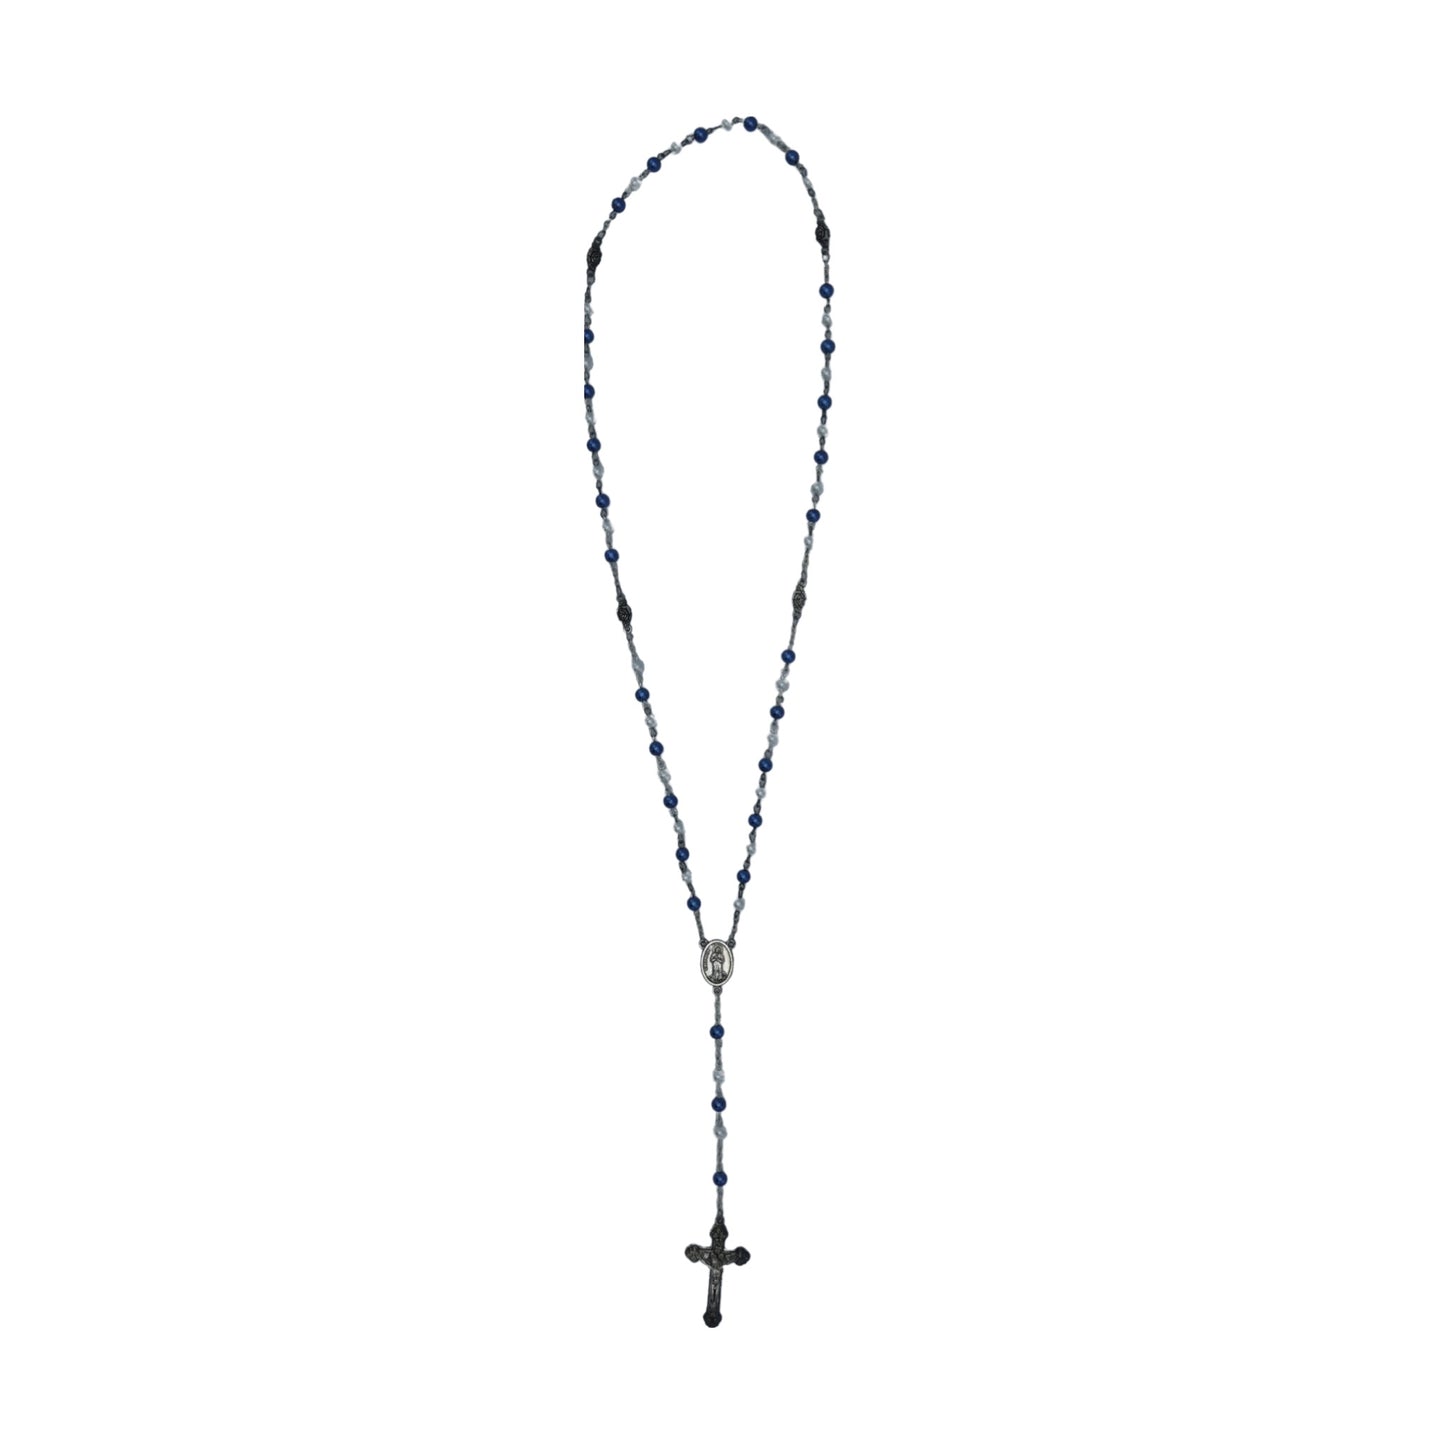 Blue and White Lourdes Rosary